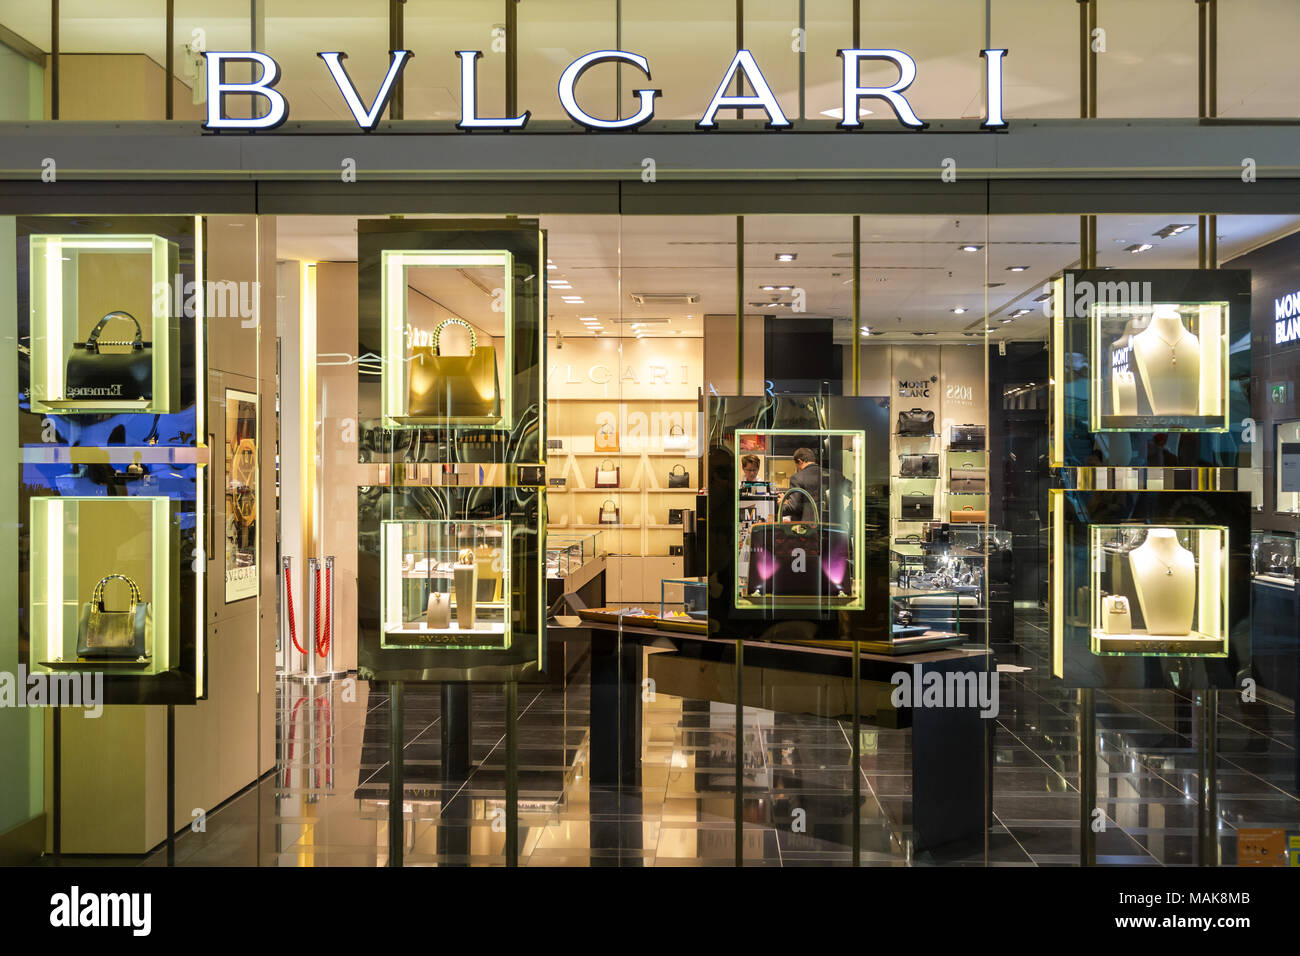 bulgari outlets in germany